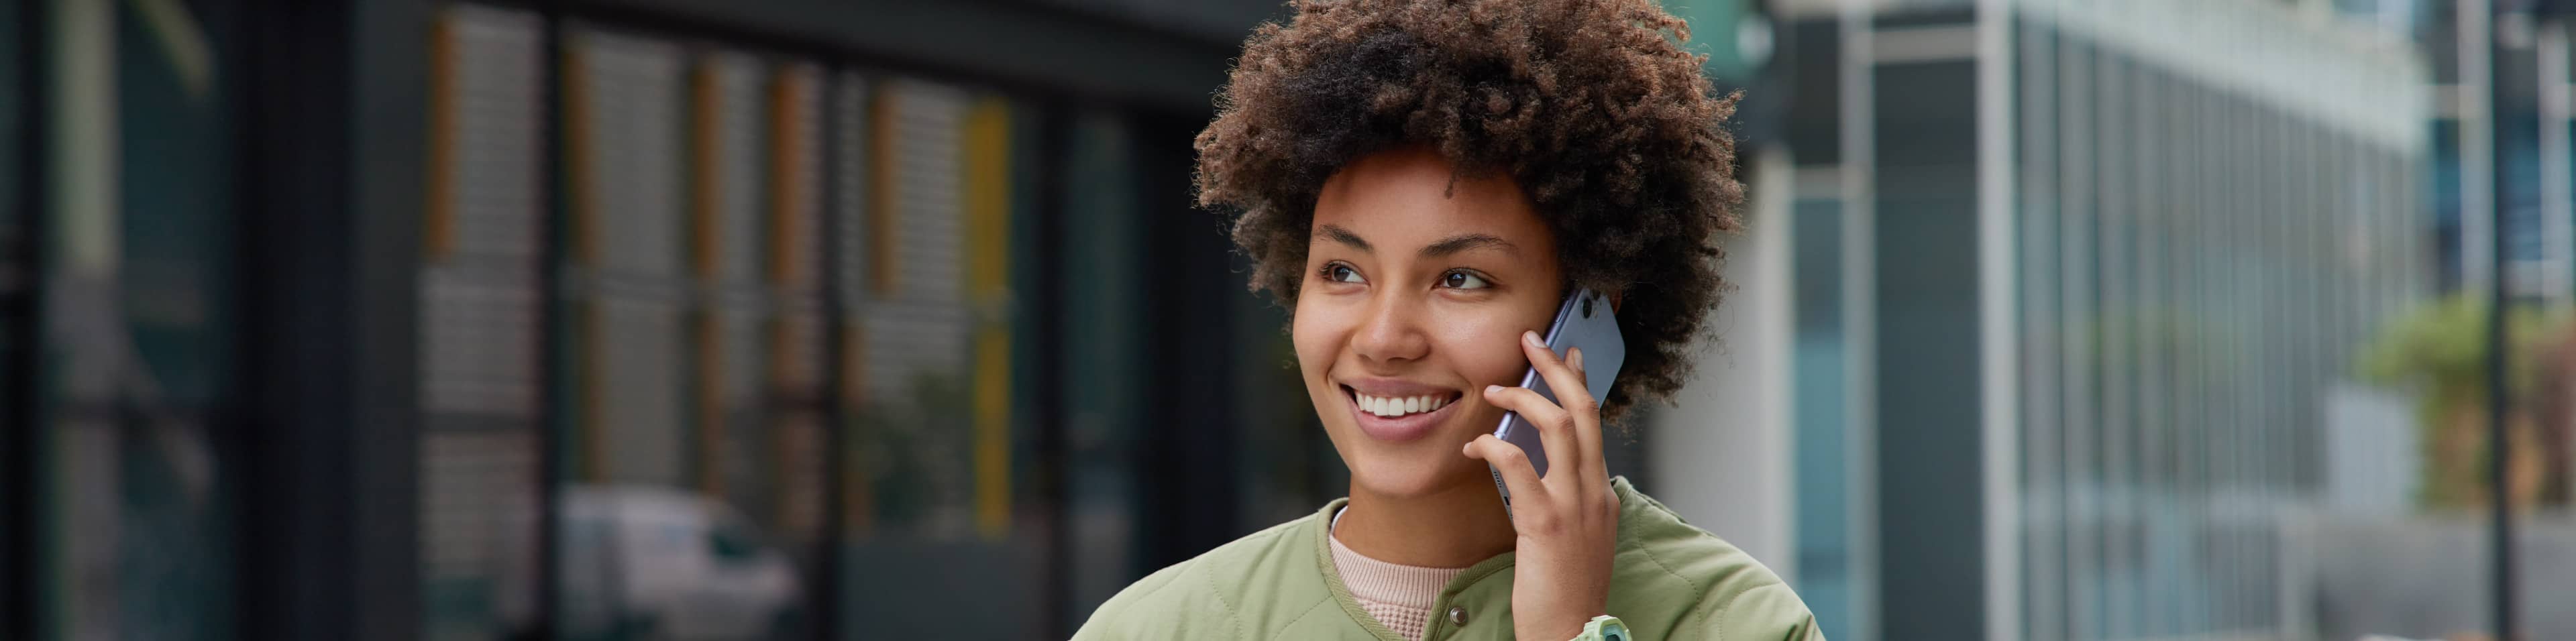 woman smiling on the phone